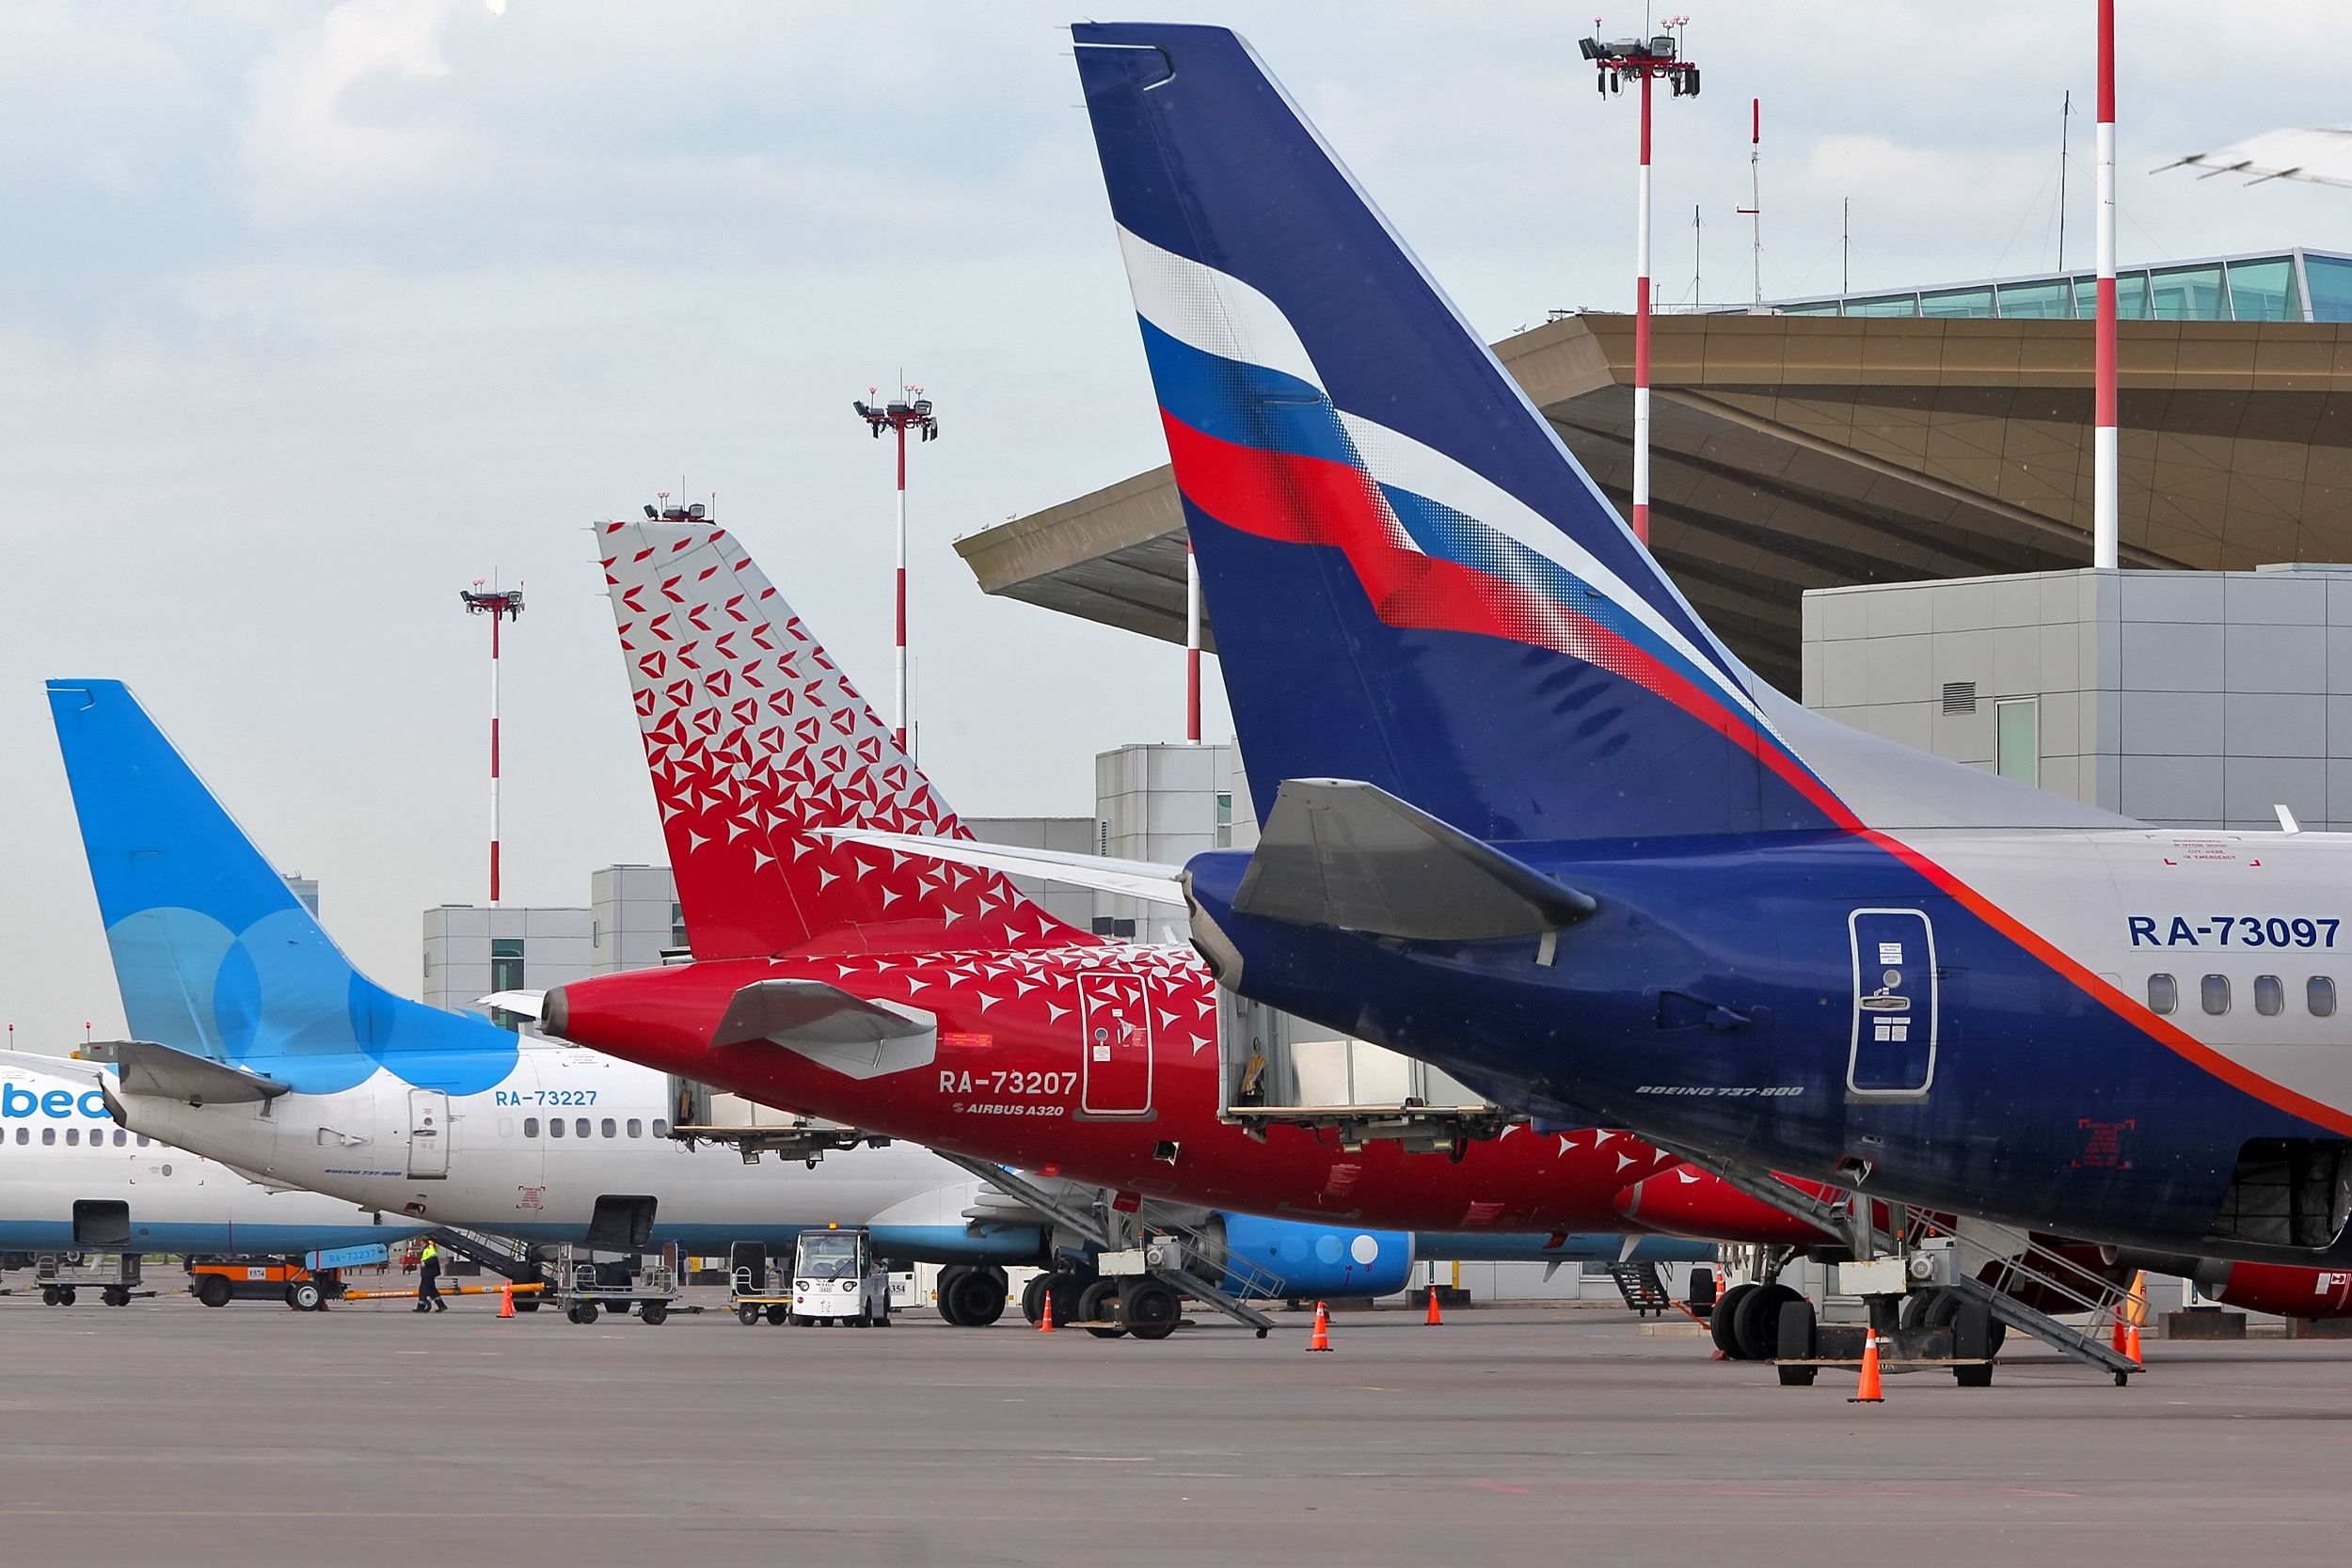 Aeroflot, Pobeda Airlines and Russian Airlines aircraft LEDs at Pulkovo Airport